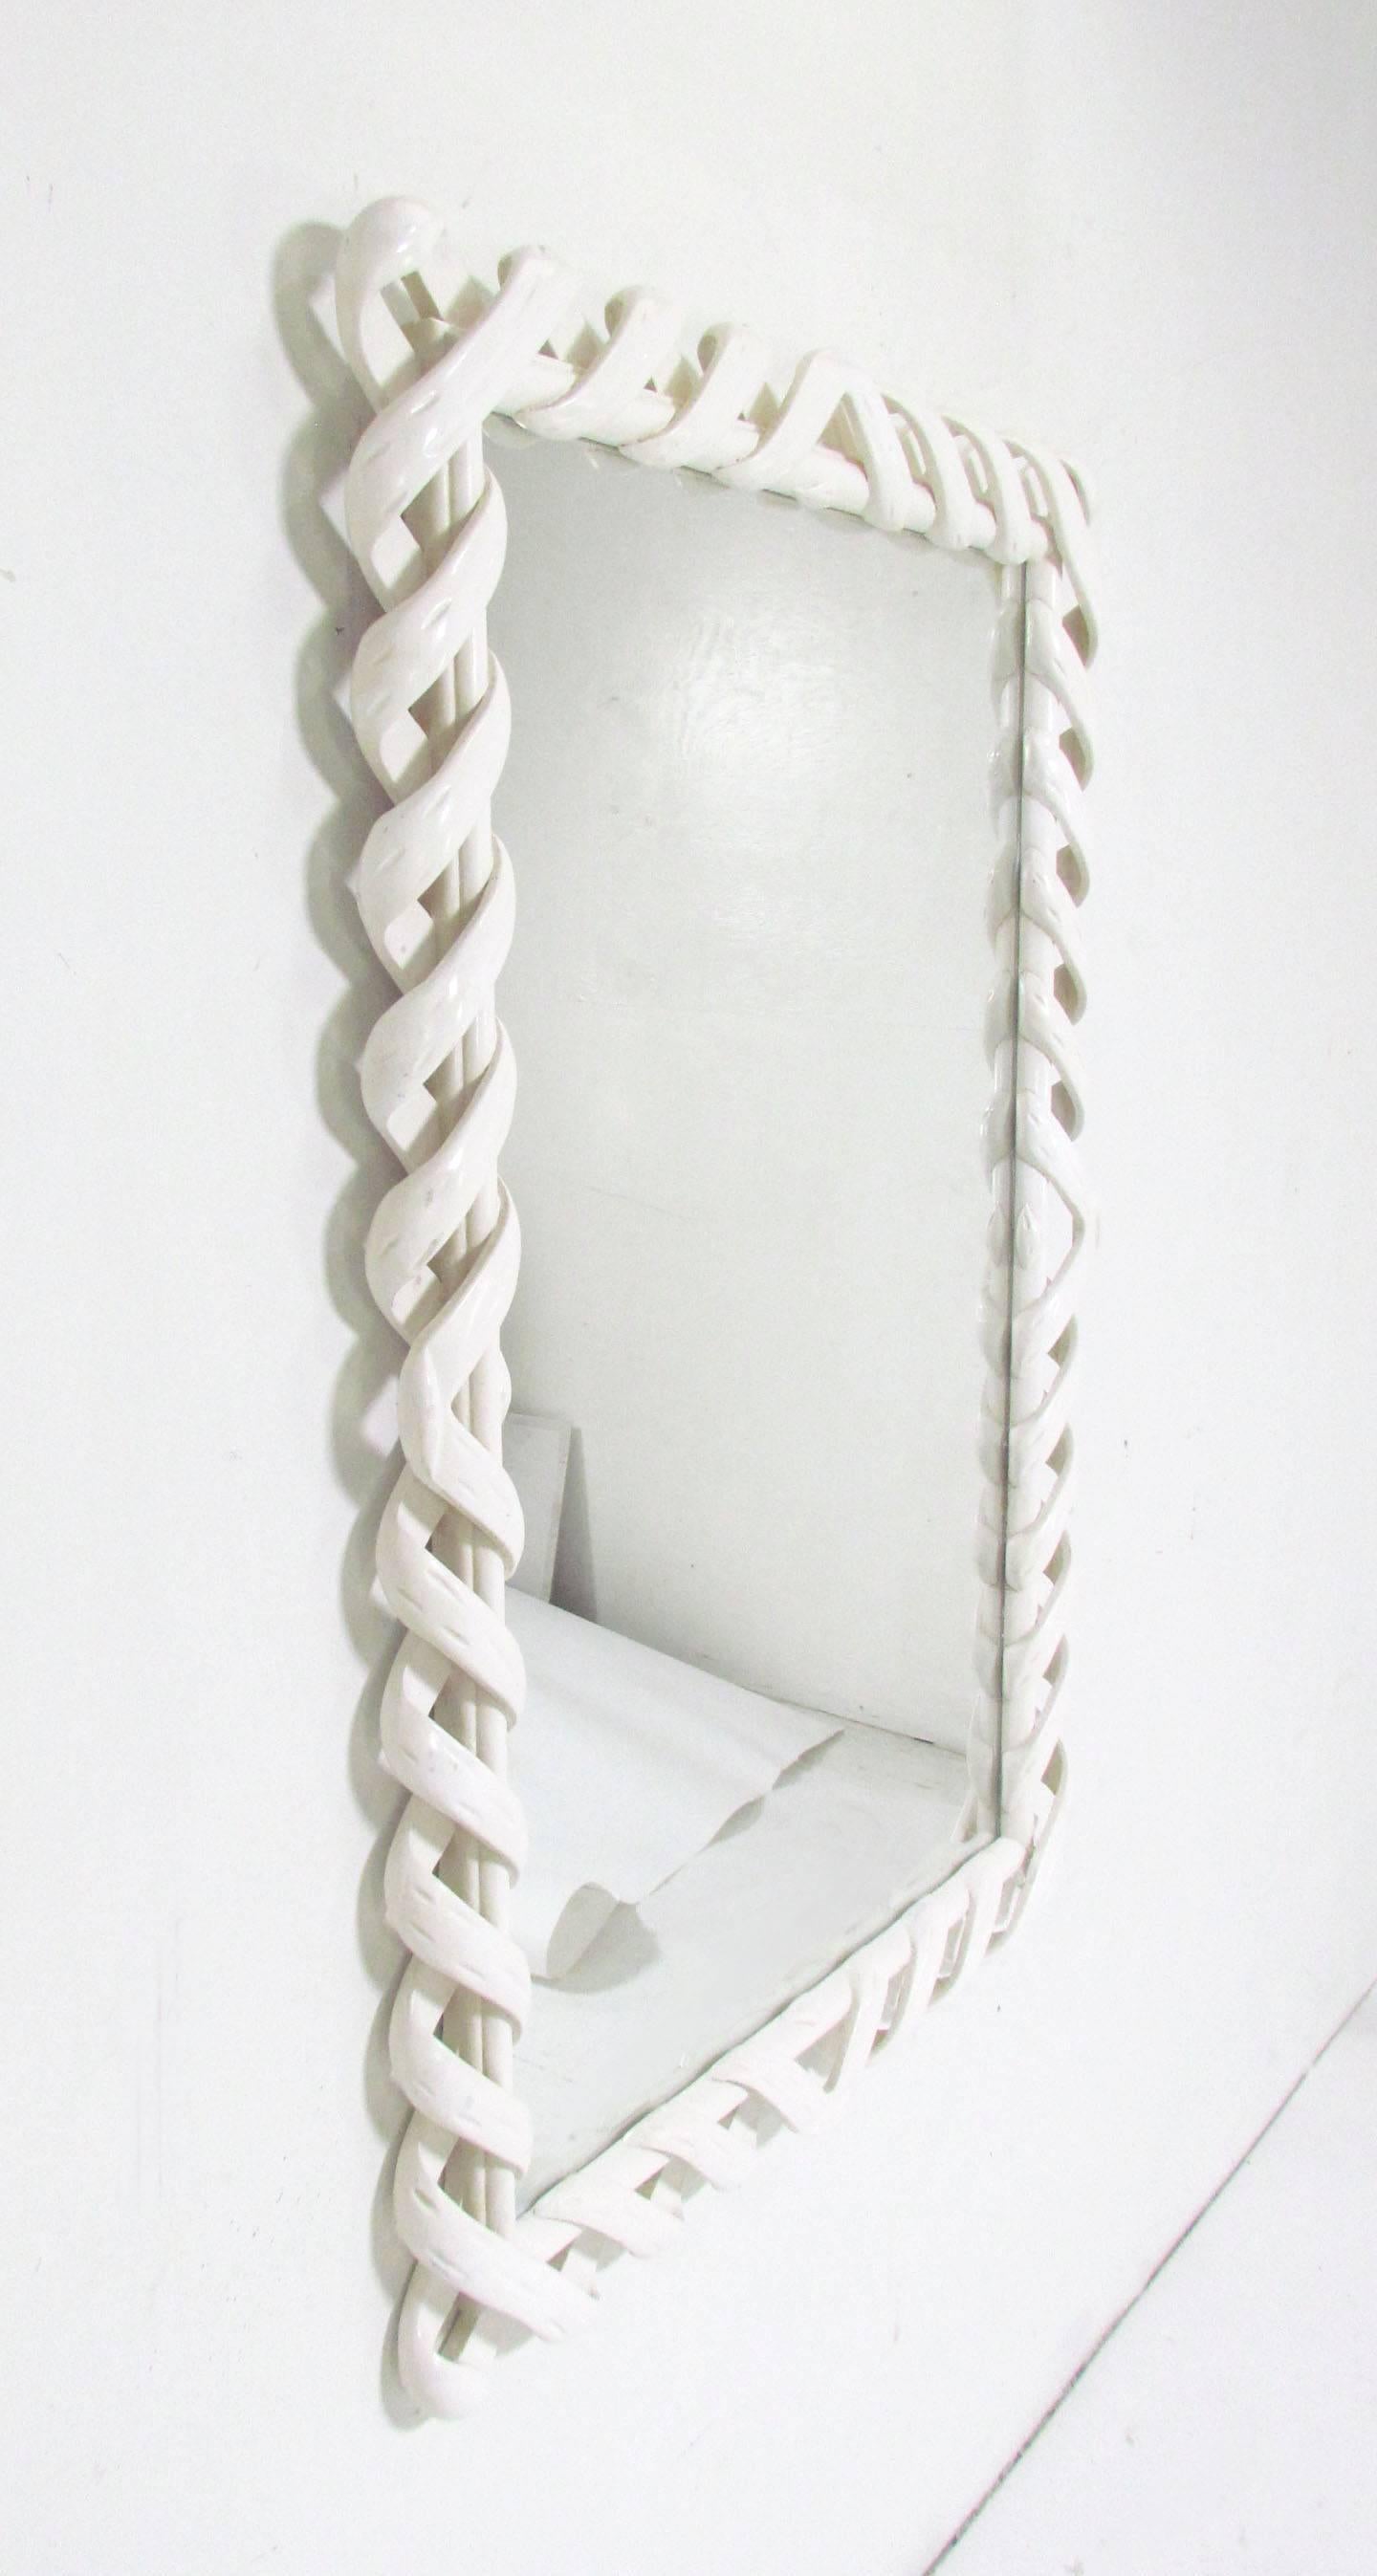 Large ribbon work wall mirror in carved and lacquered wood by D. Milch & Son, circa 1960s. Can be oriented either vertically as shown or horizontally.
 